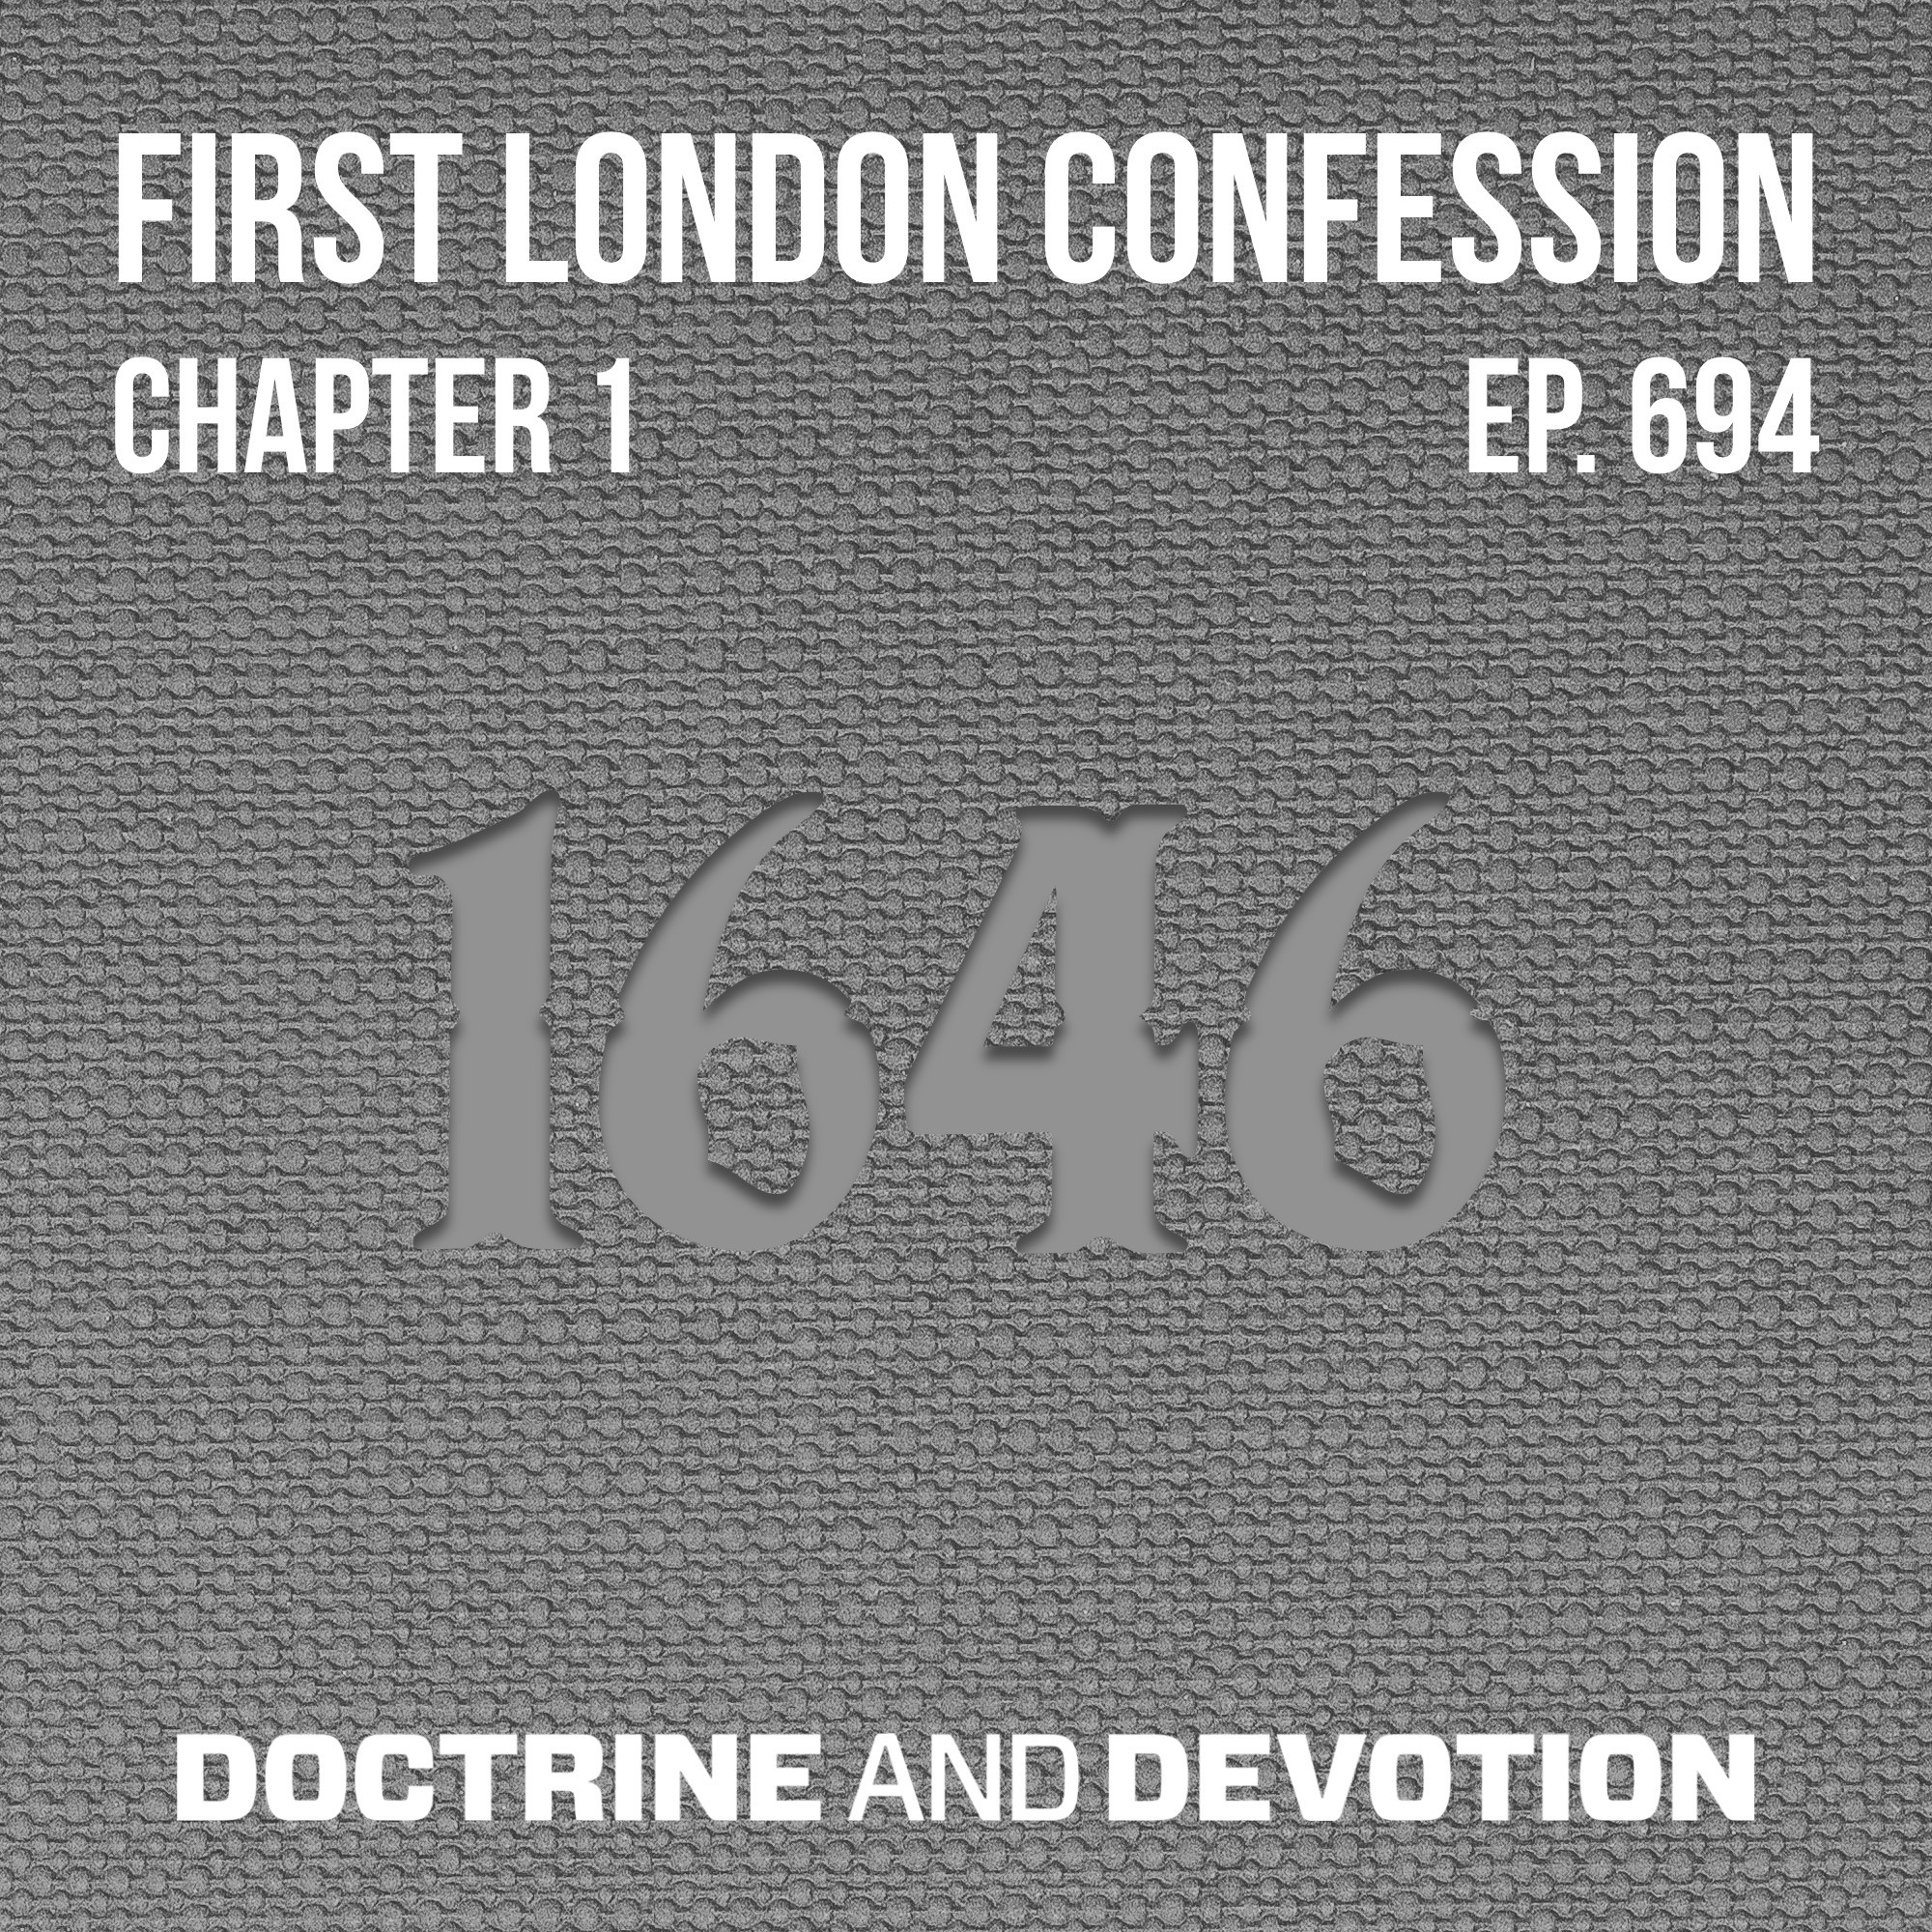 First London Confession, Ch 1 on God